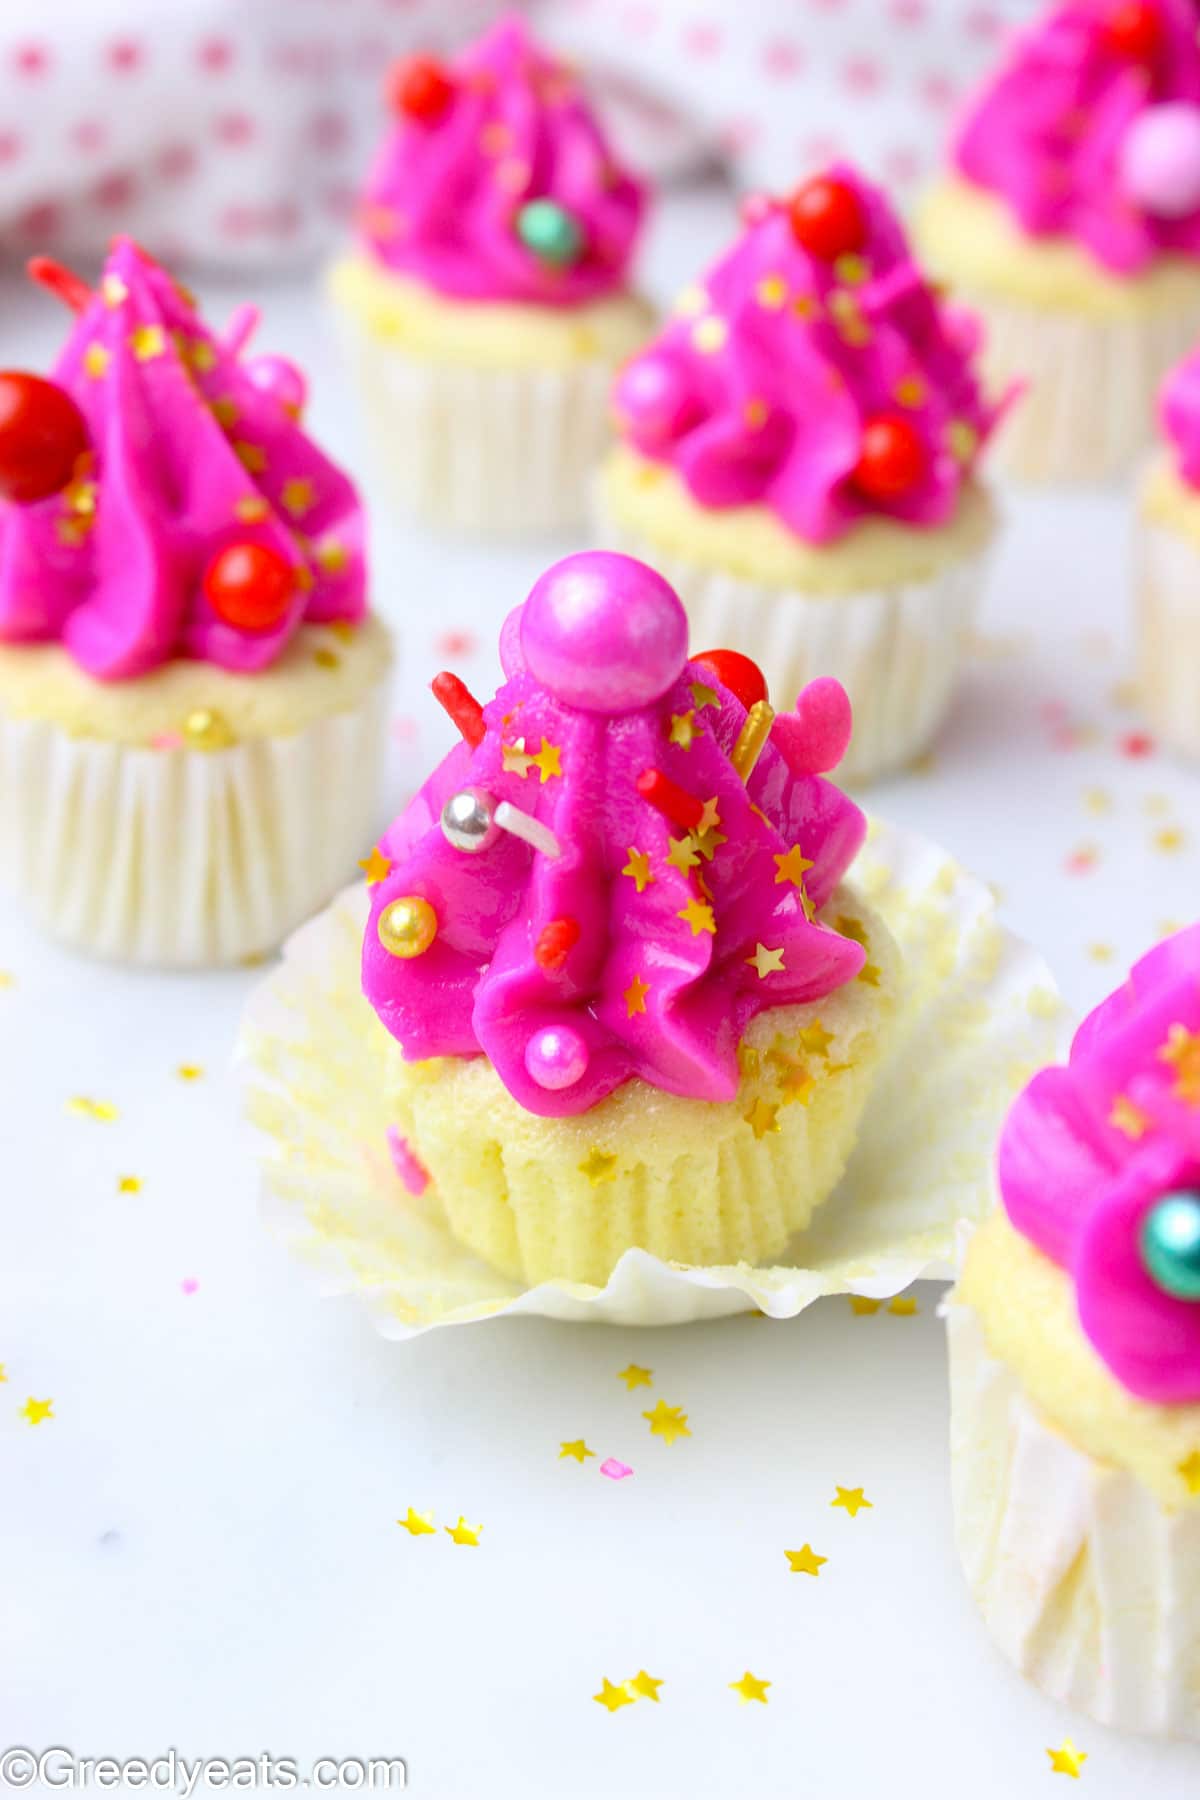 Mini Cupcakes topped with hot pink buttercream frosting and sprinkles in a white cupcake liner.